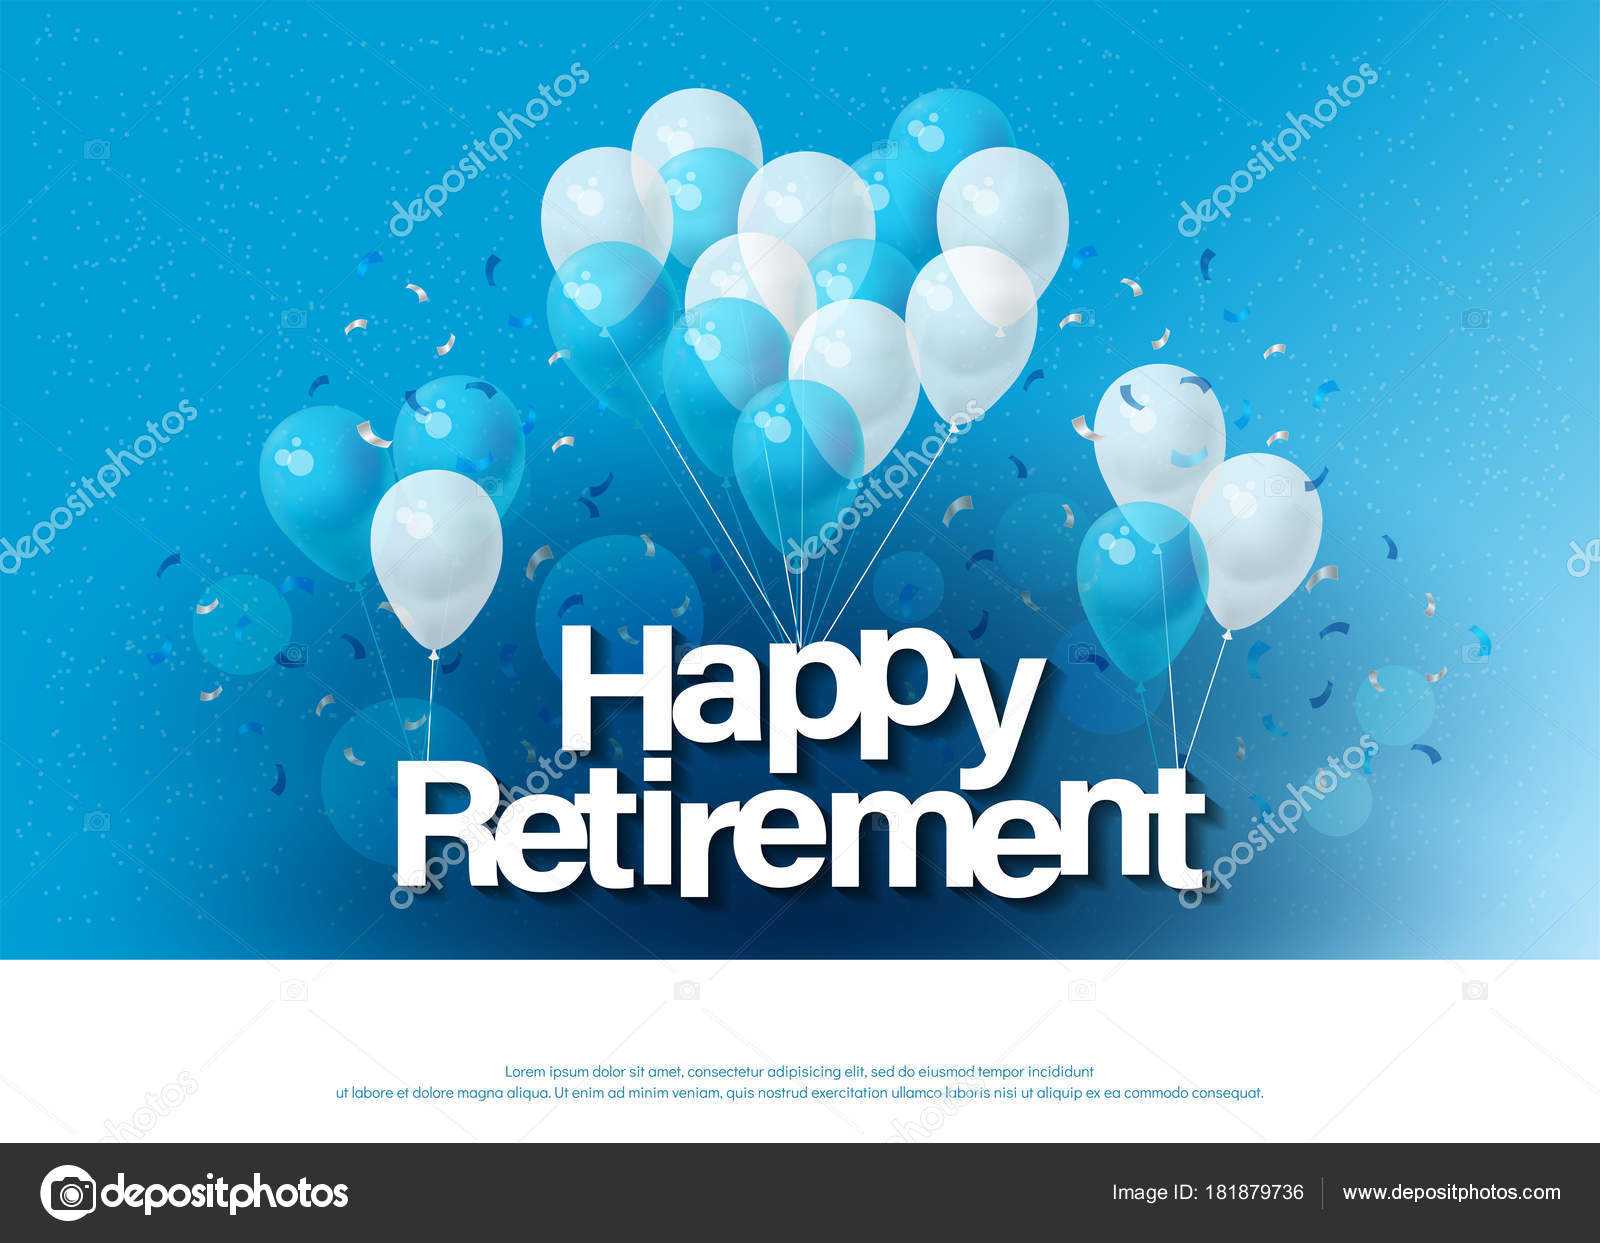 Images: Congratulations On Your Retirement | Happy Inside Free Retirement Templates For Flyers